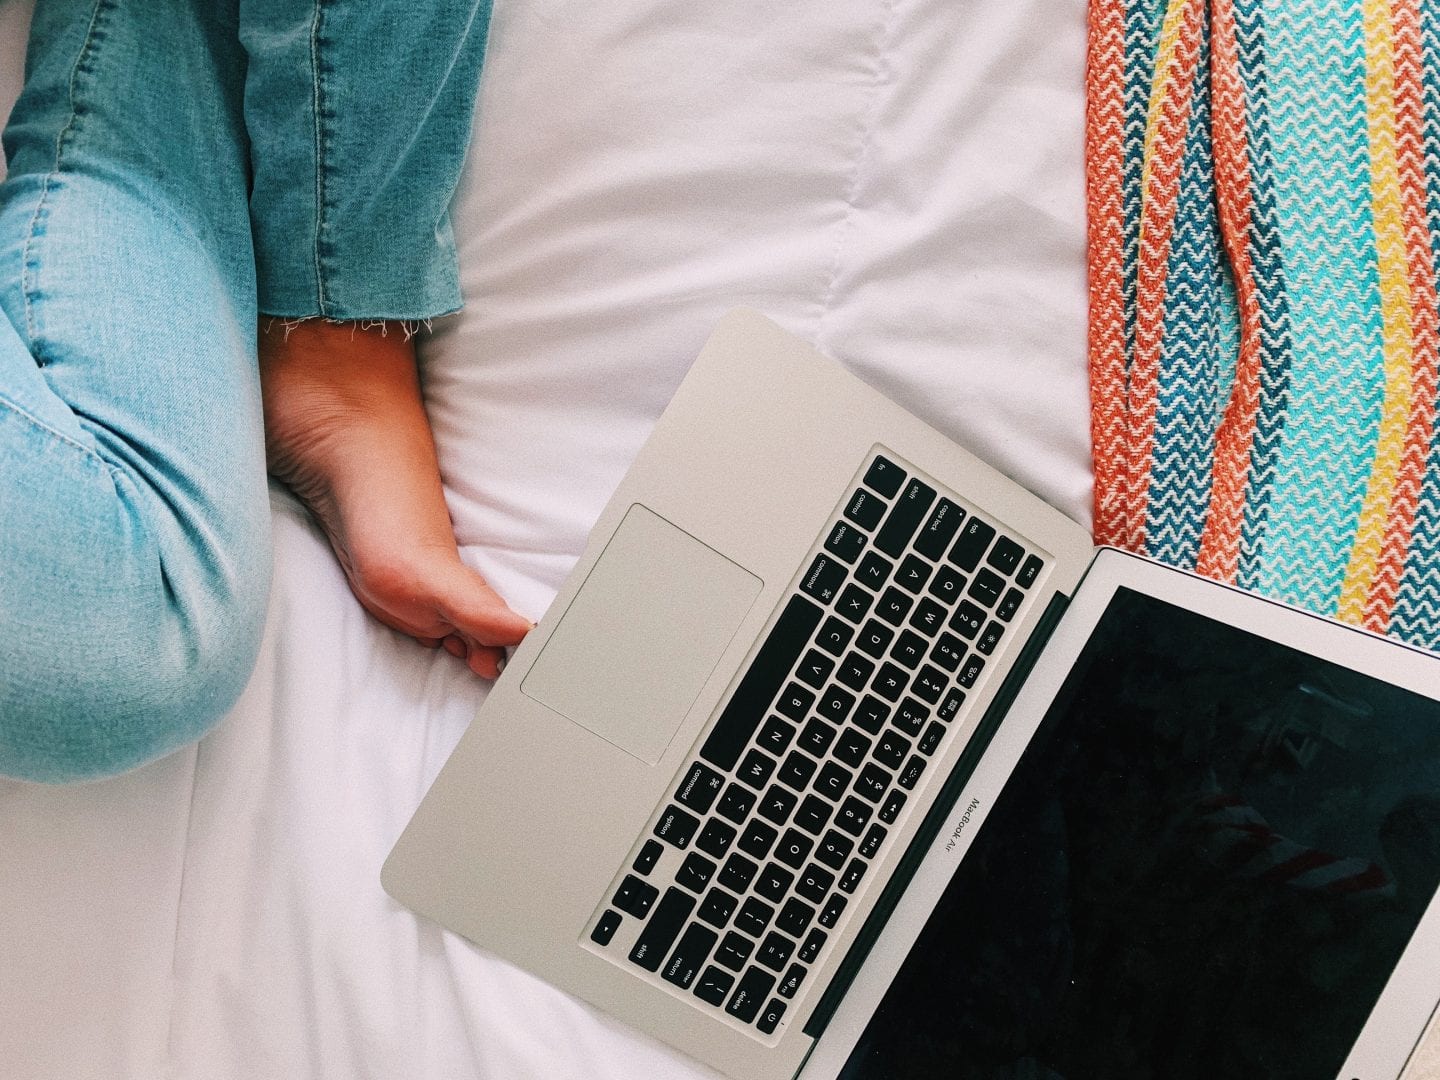 mac book and legs of someone sitting in a bed with a colorful throw blanket